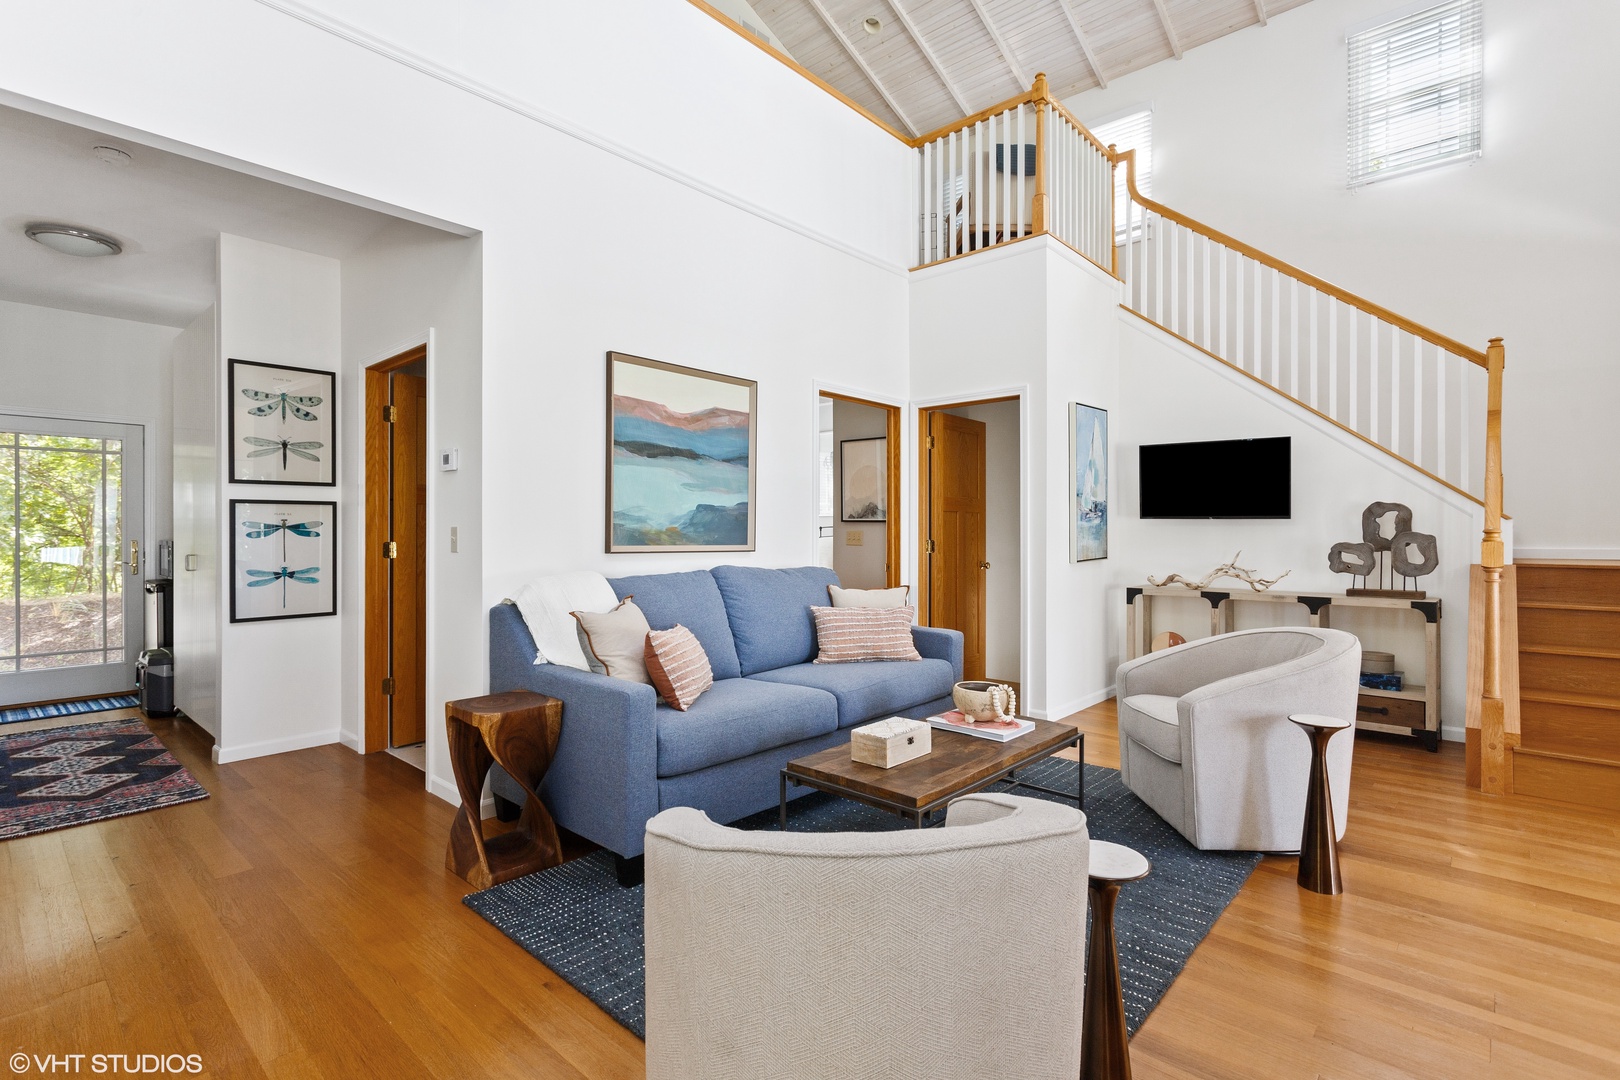 Bright and airy social spaces in this Nantucket-style residence are ideal for family gatherings.